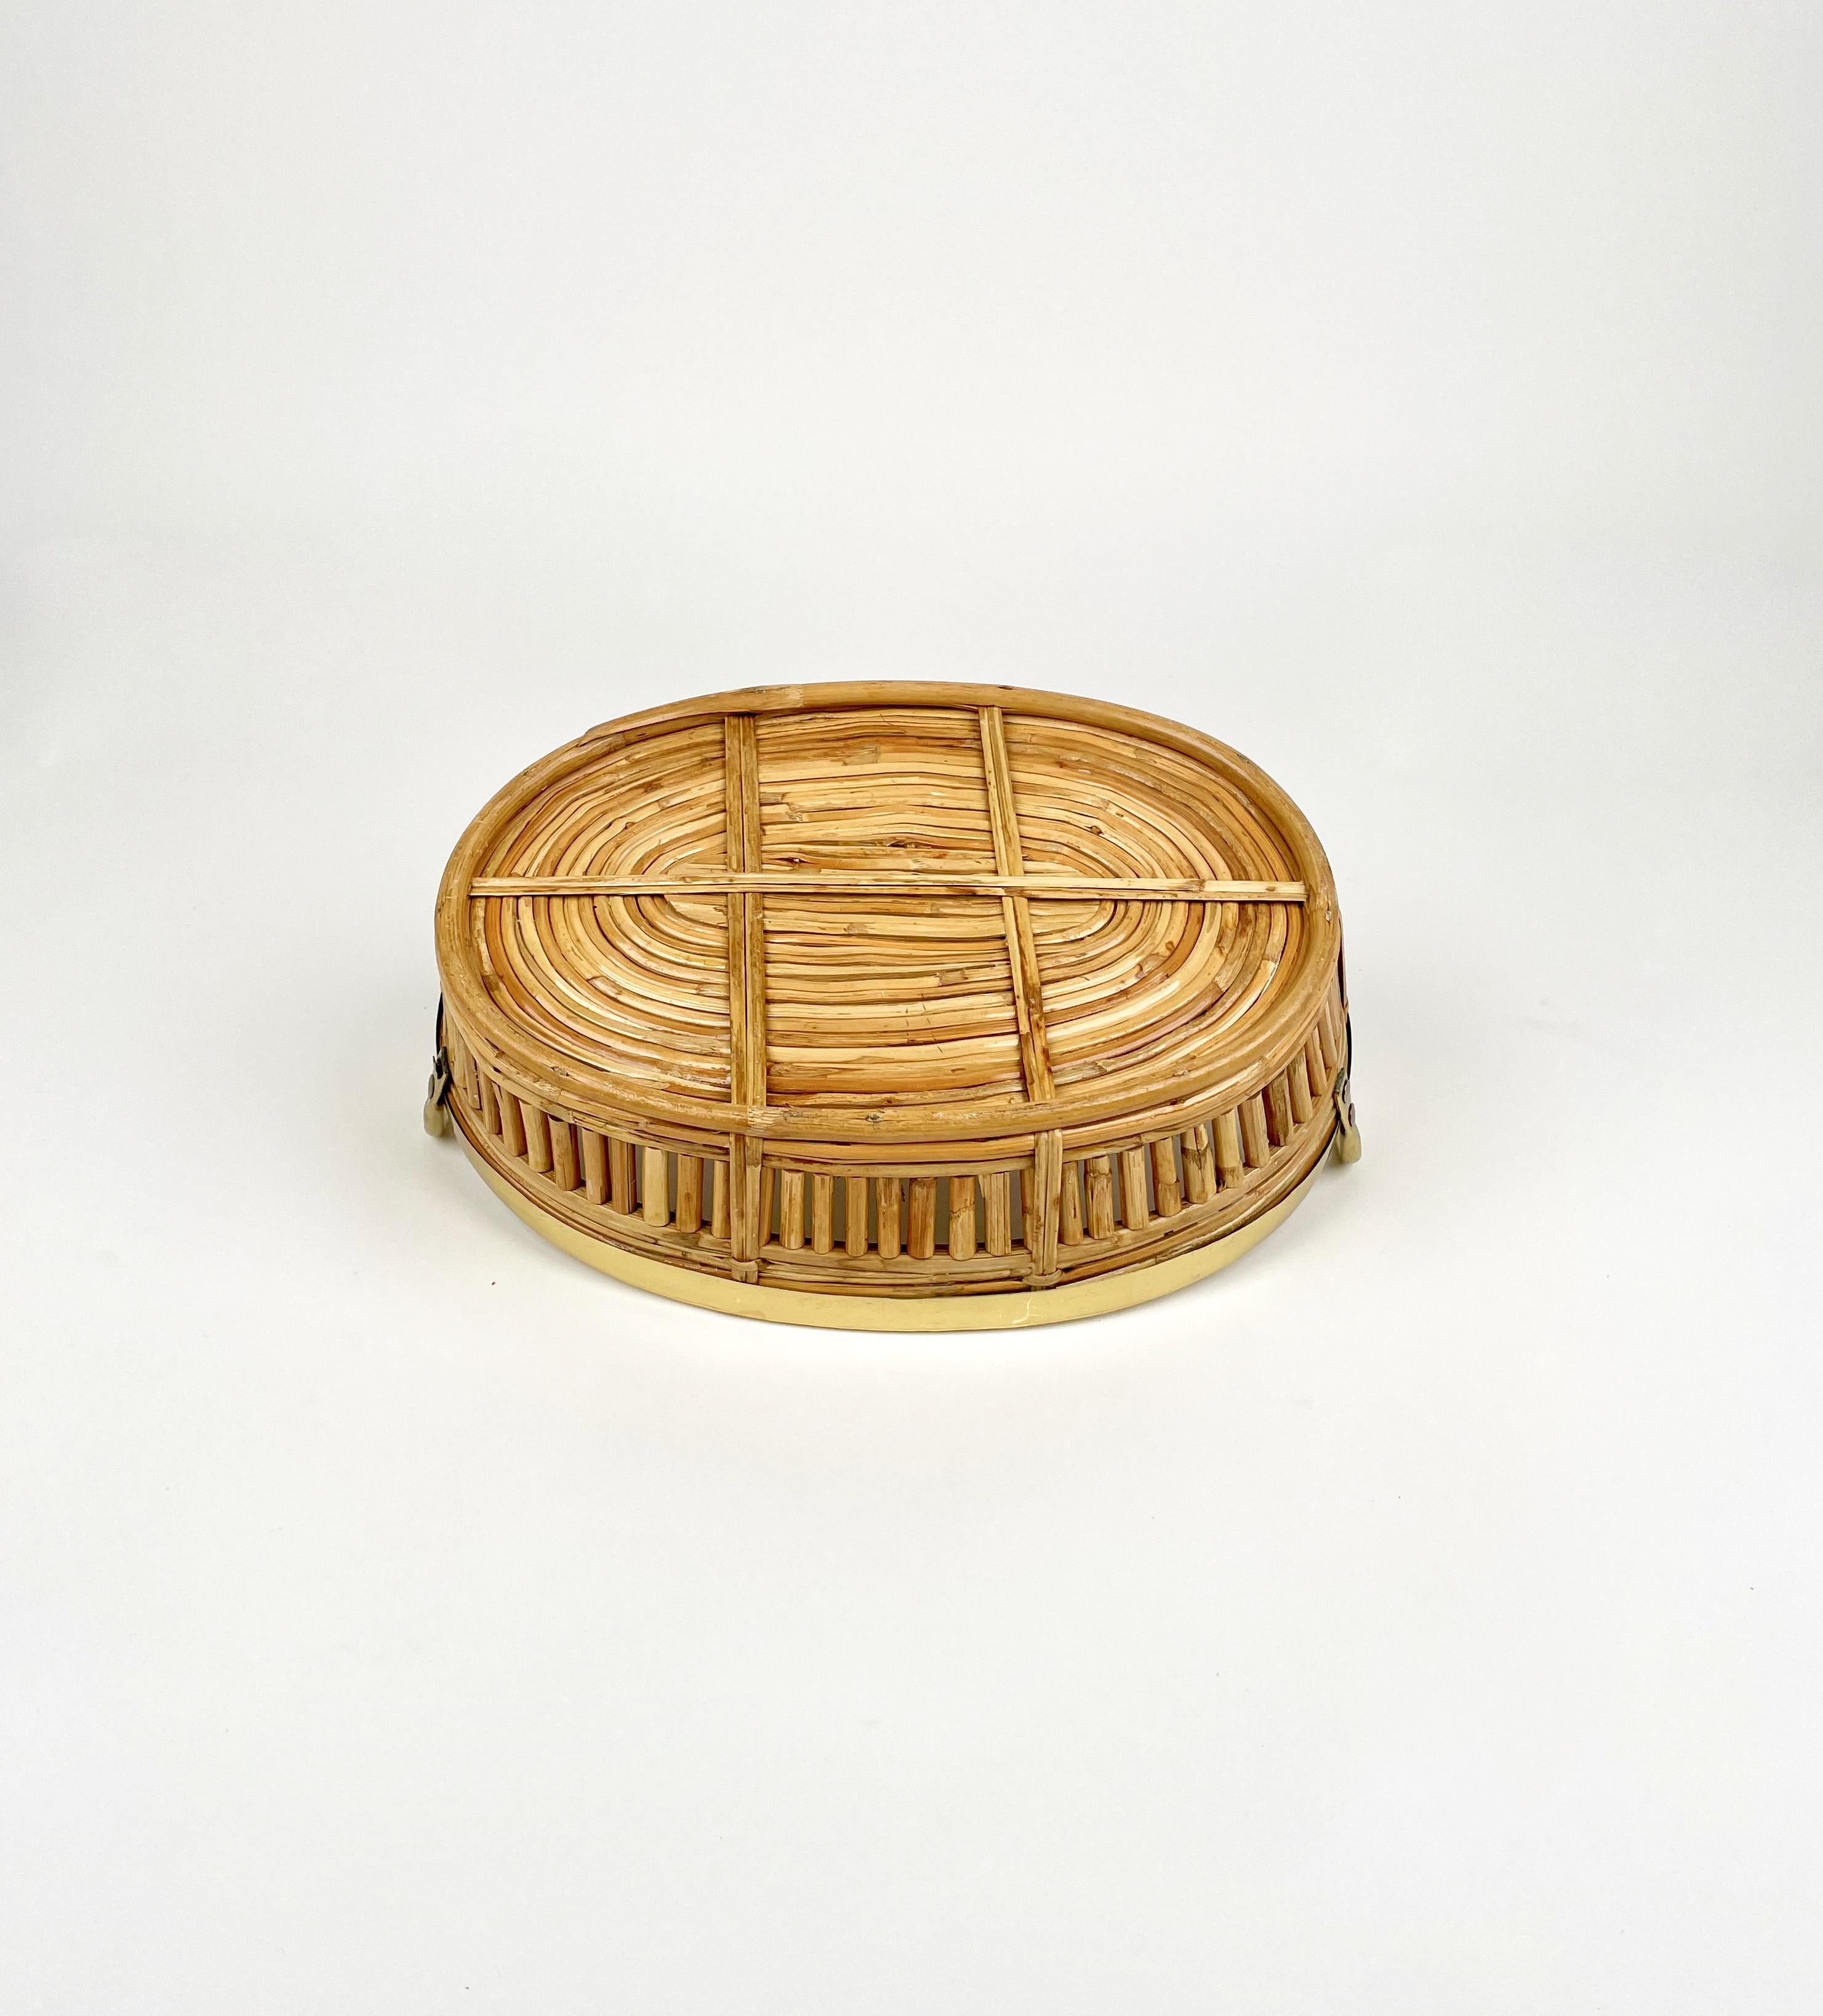 Midcentury Centerpiece Basket Rattan and Brass, Italy 1970s For Sale 6